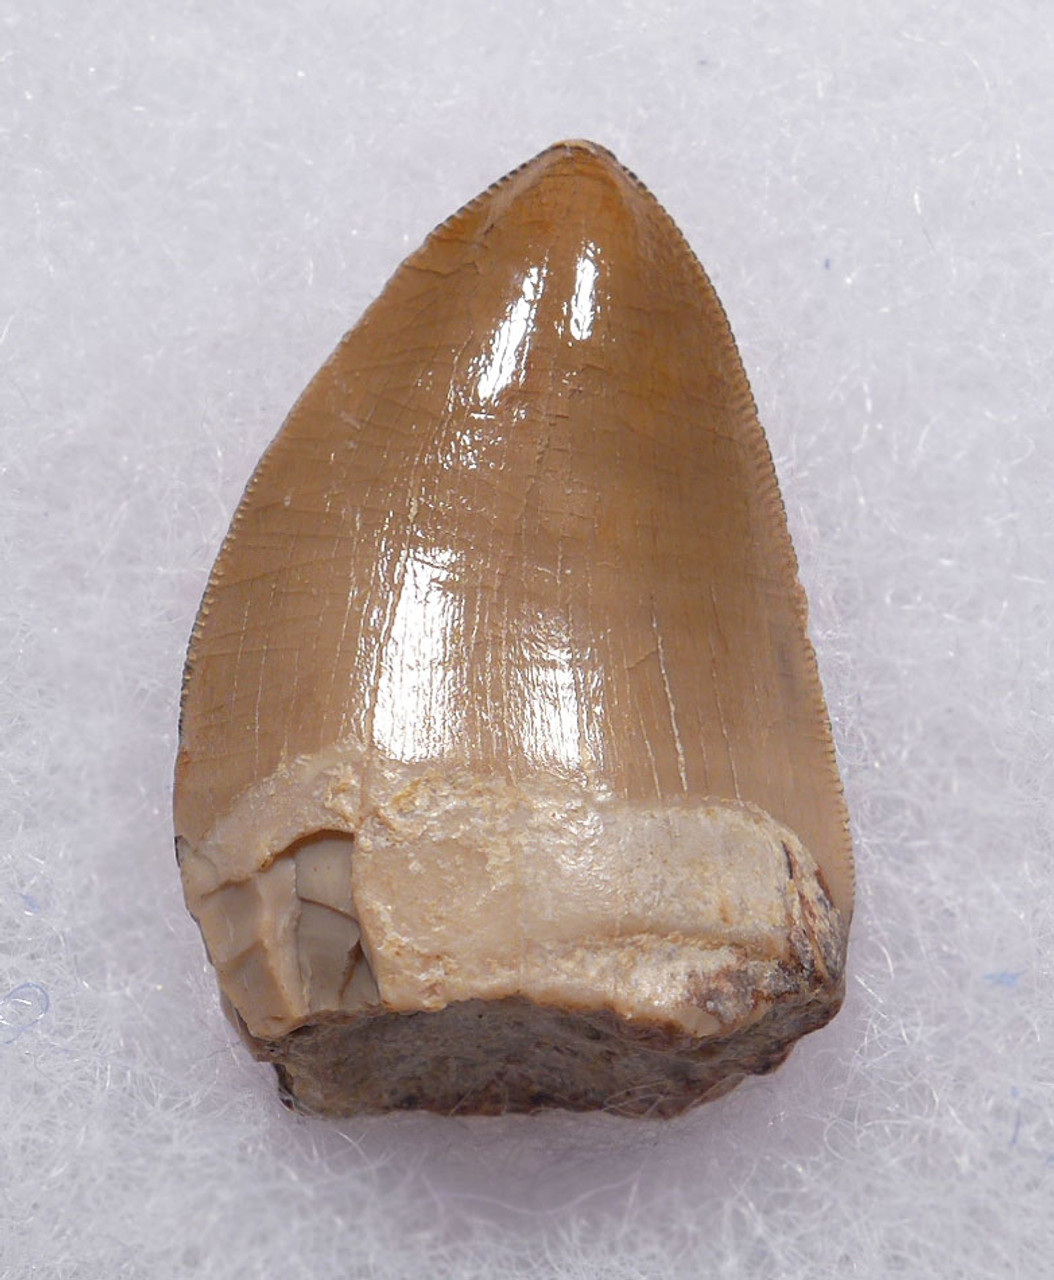 VERY LARGE RUTIODON PHYTOSAUR TOOTH FROM TRIASSIC PETRIFIED FOREST FORMATION  *DT12-223